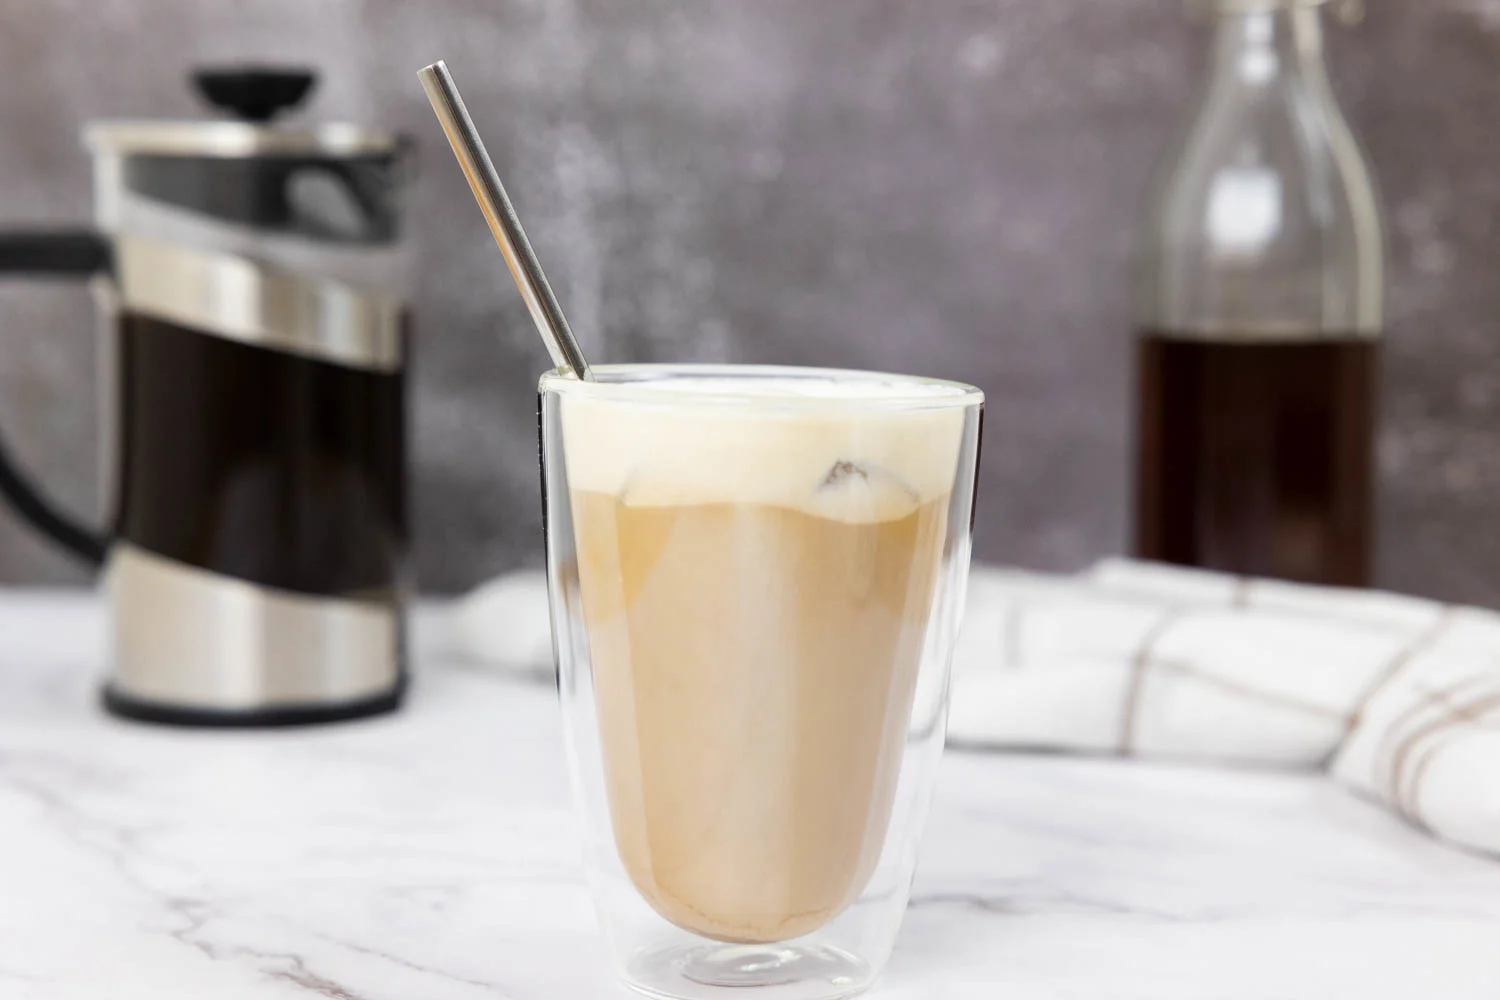 Salted caramel cream cold brew in a glass with a straw